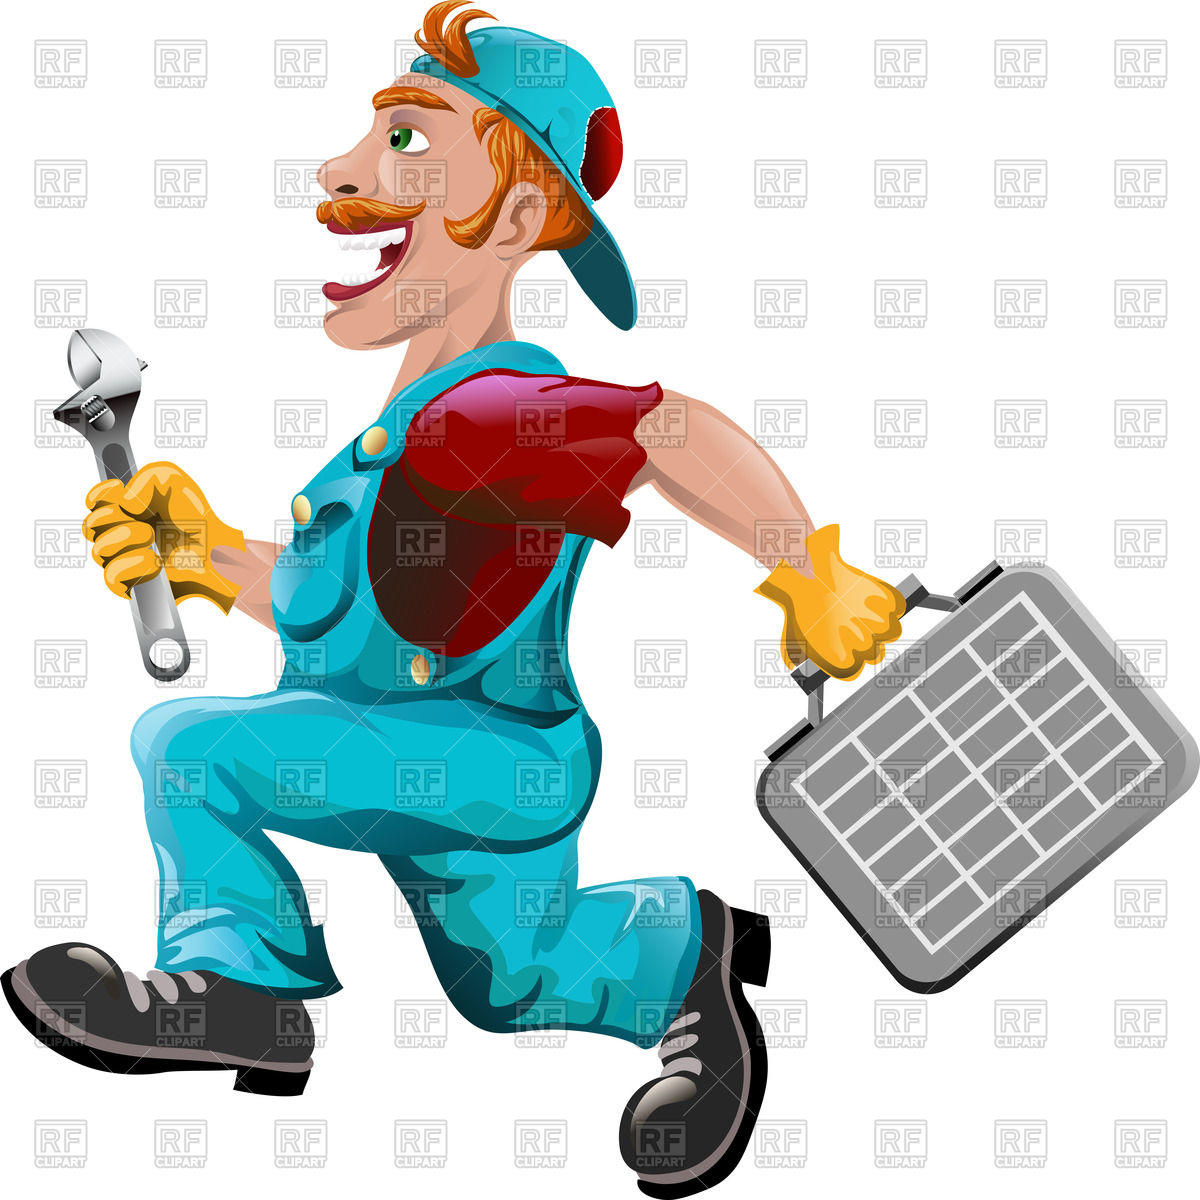 Funny Running Plumber In Cartoon Style 63126 Download Royalty Free    